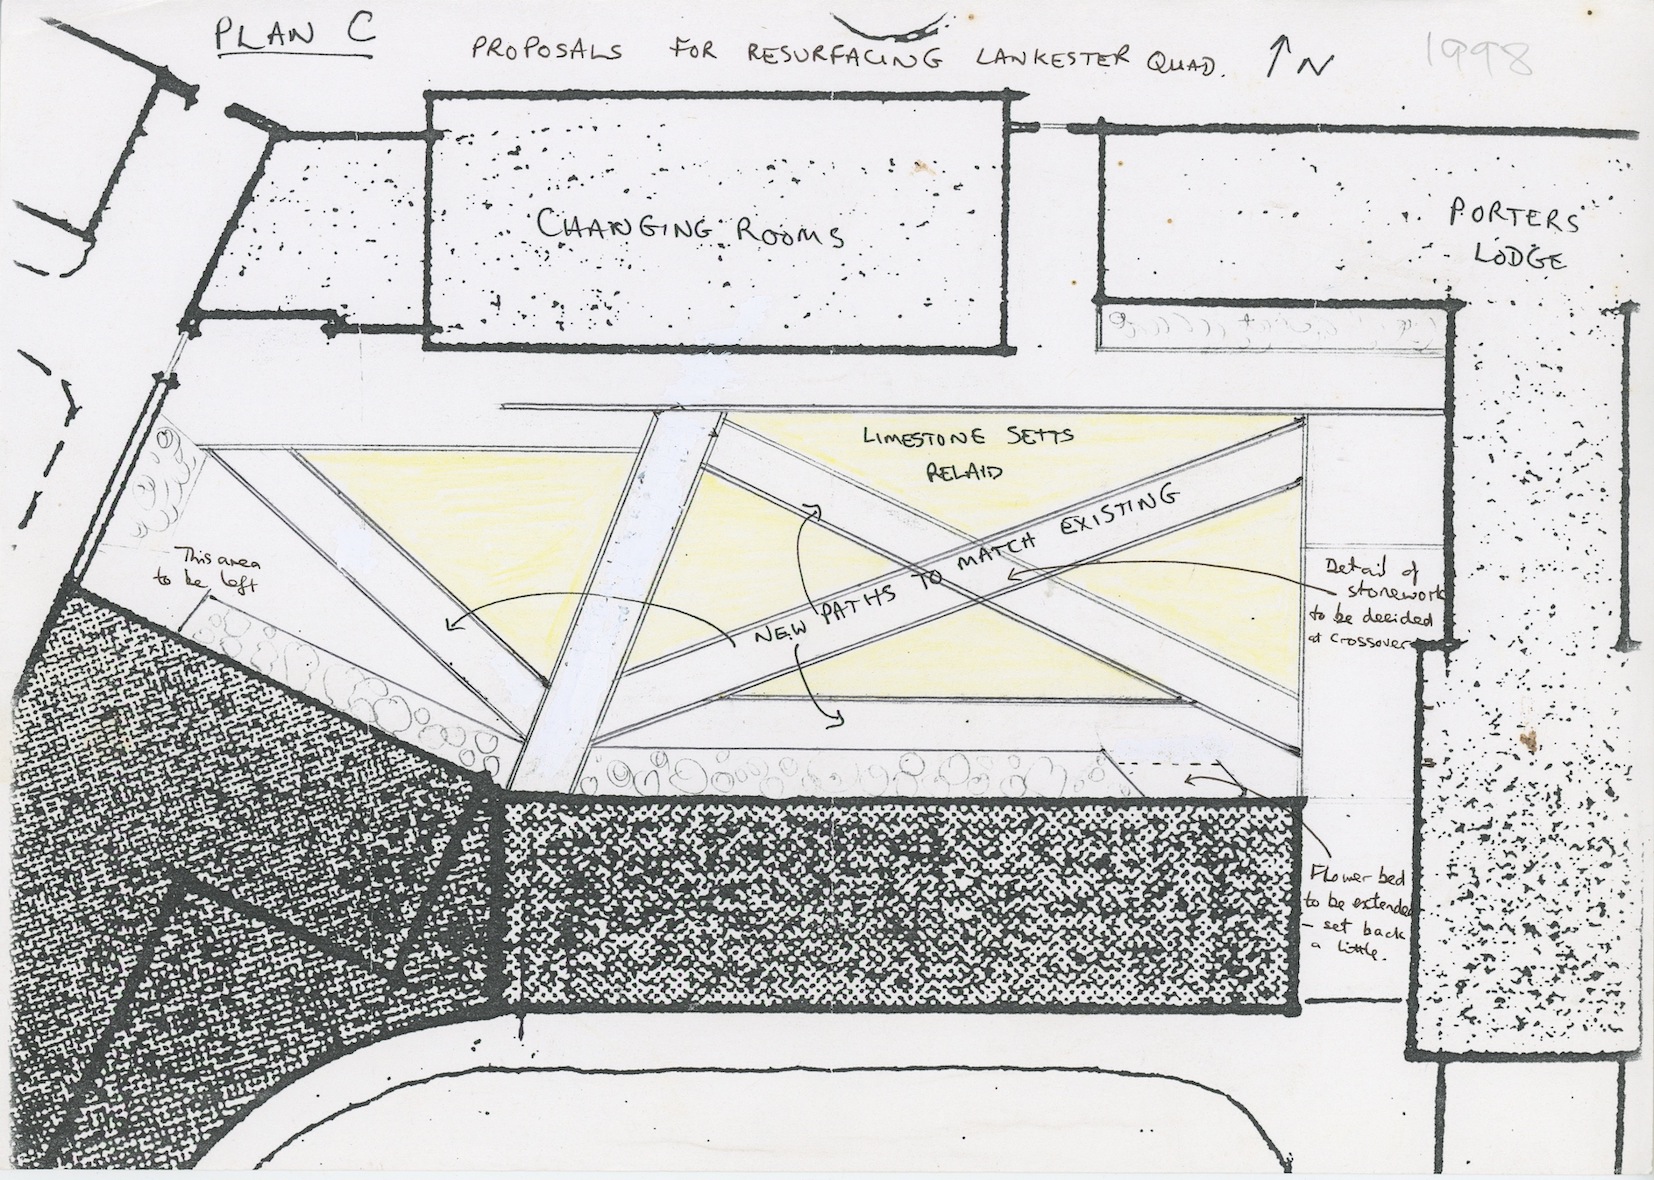 A pencil drawing of plans for criss-cross pathing across Lankester Quad